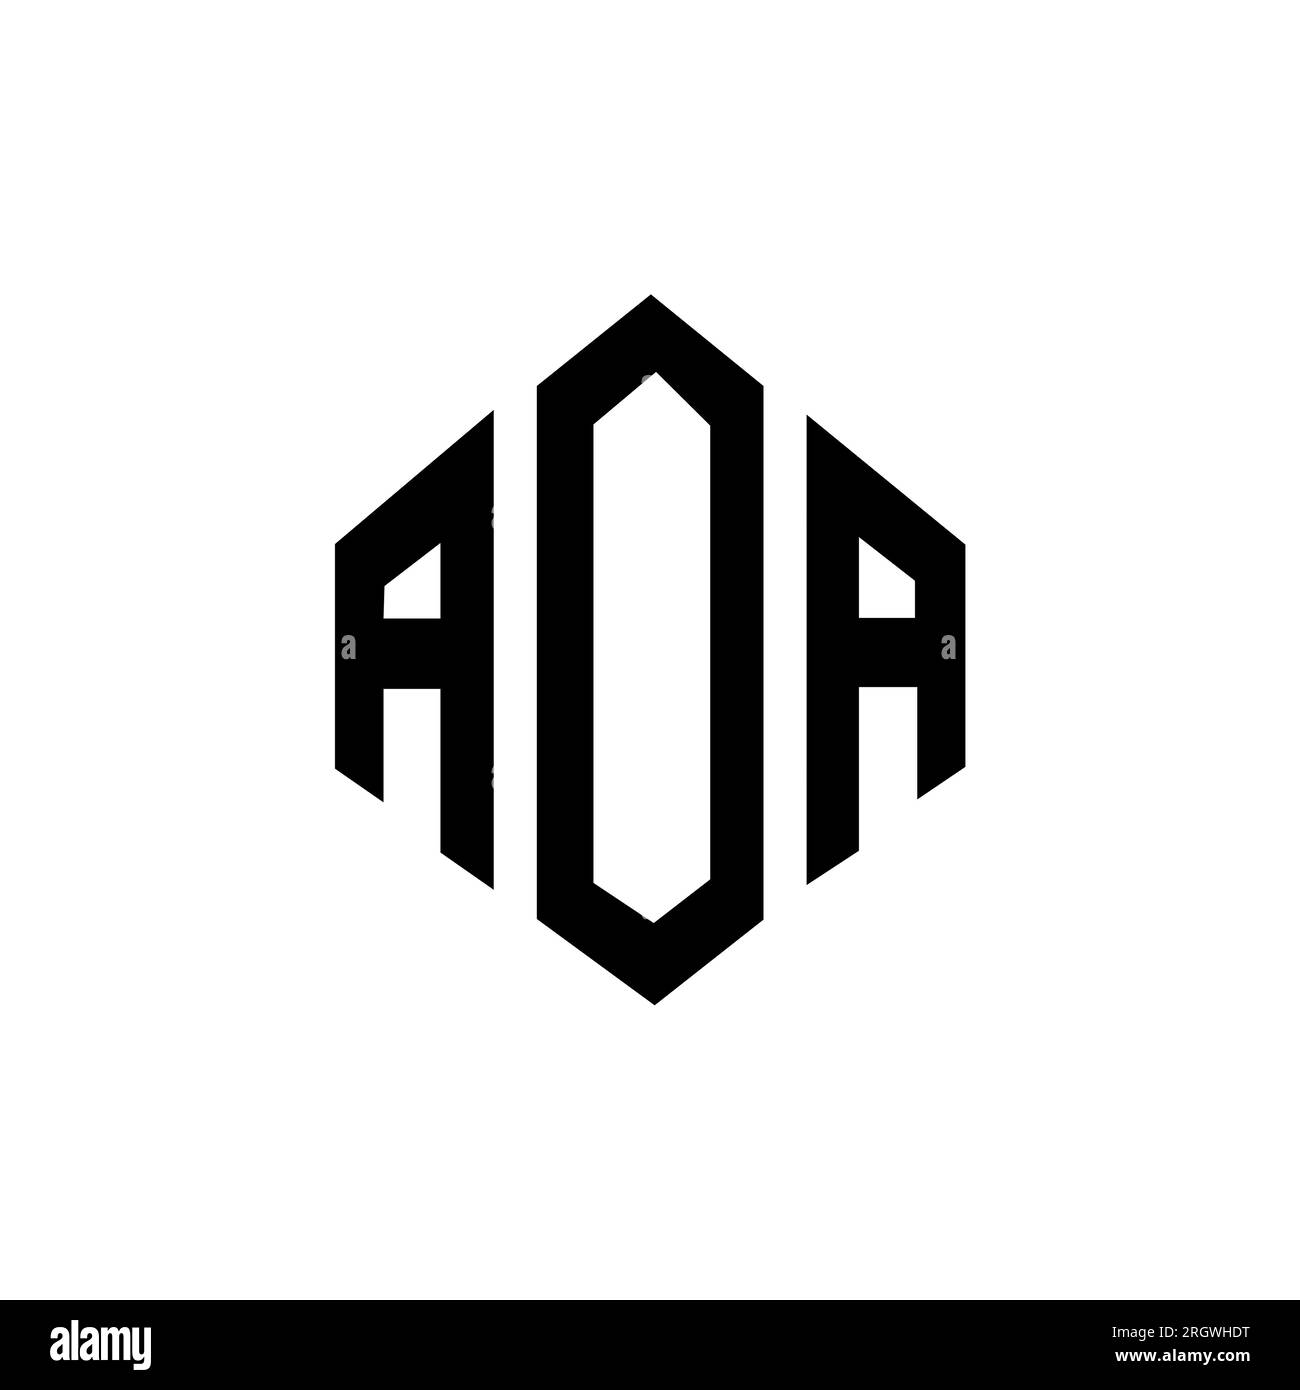 Kpop AOA HD Wallpapers New Tab Themes - HD Wallpapers & Backgrounds